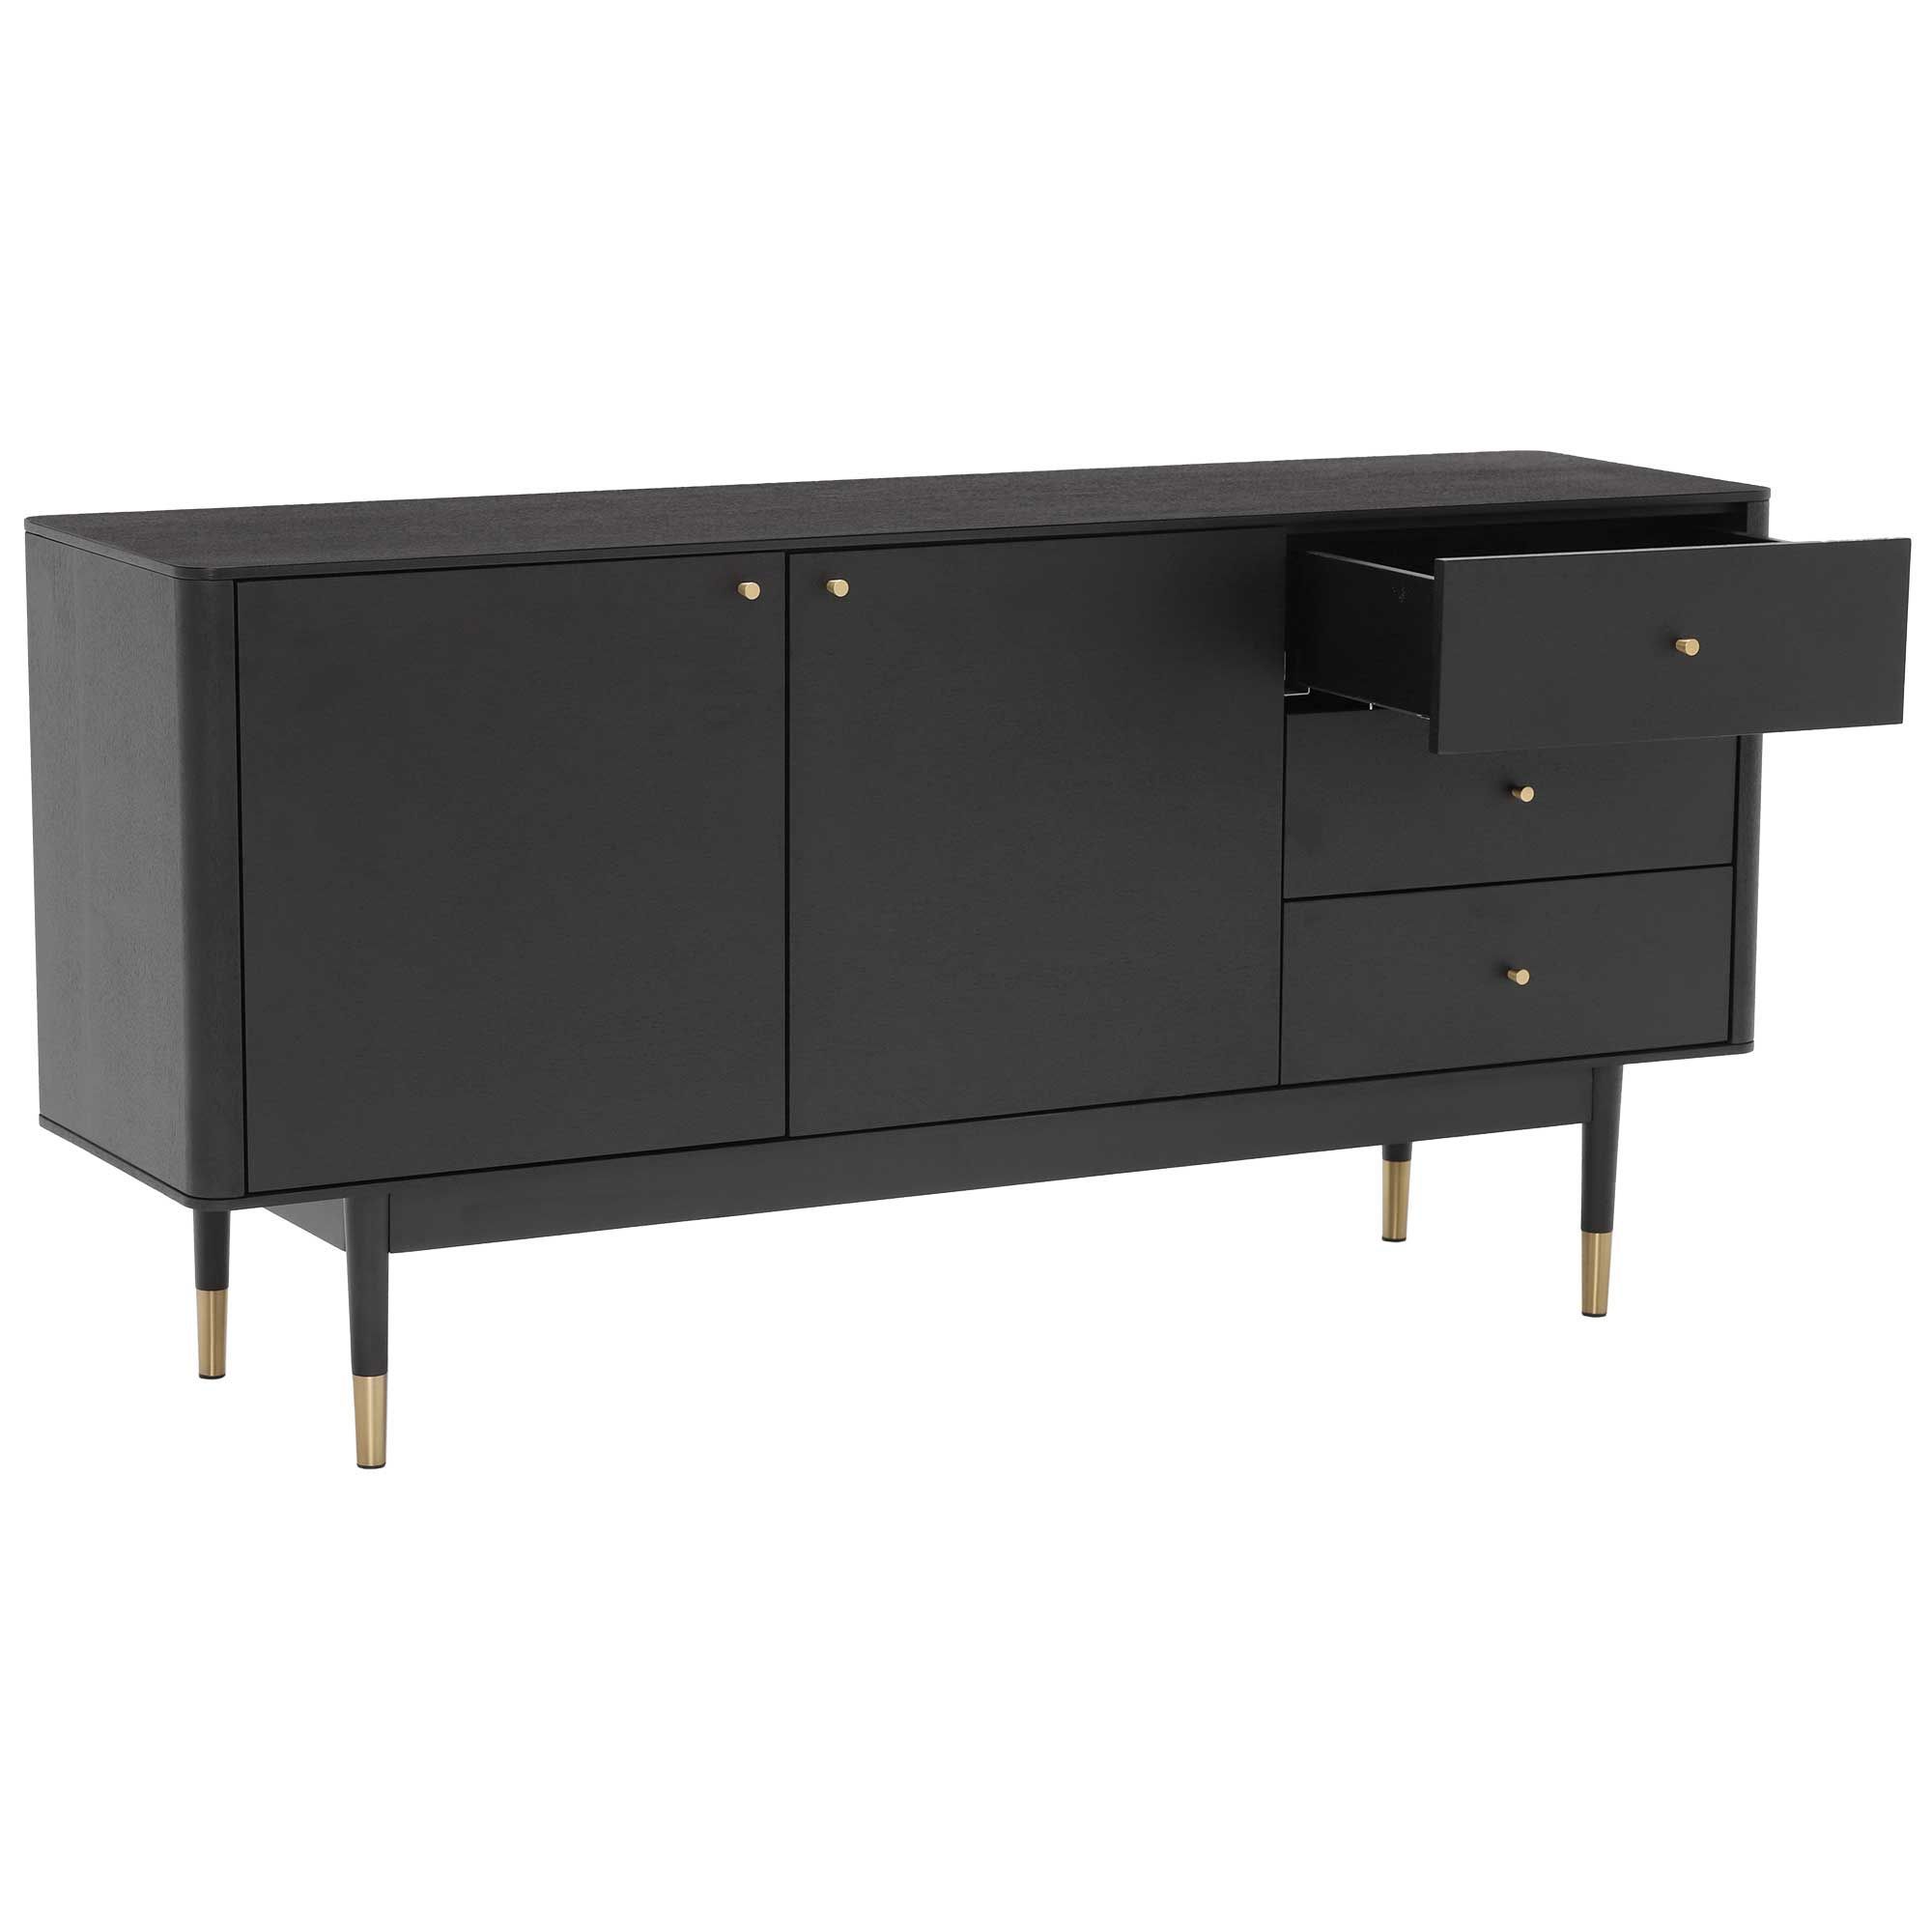 Cannelle Black Sideboard, Black Ash & Gold | – Barker With Regard To 2017 Weinberger Sideboards (View 16 of 20)